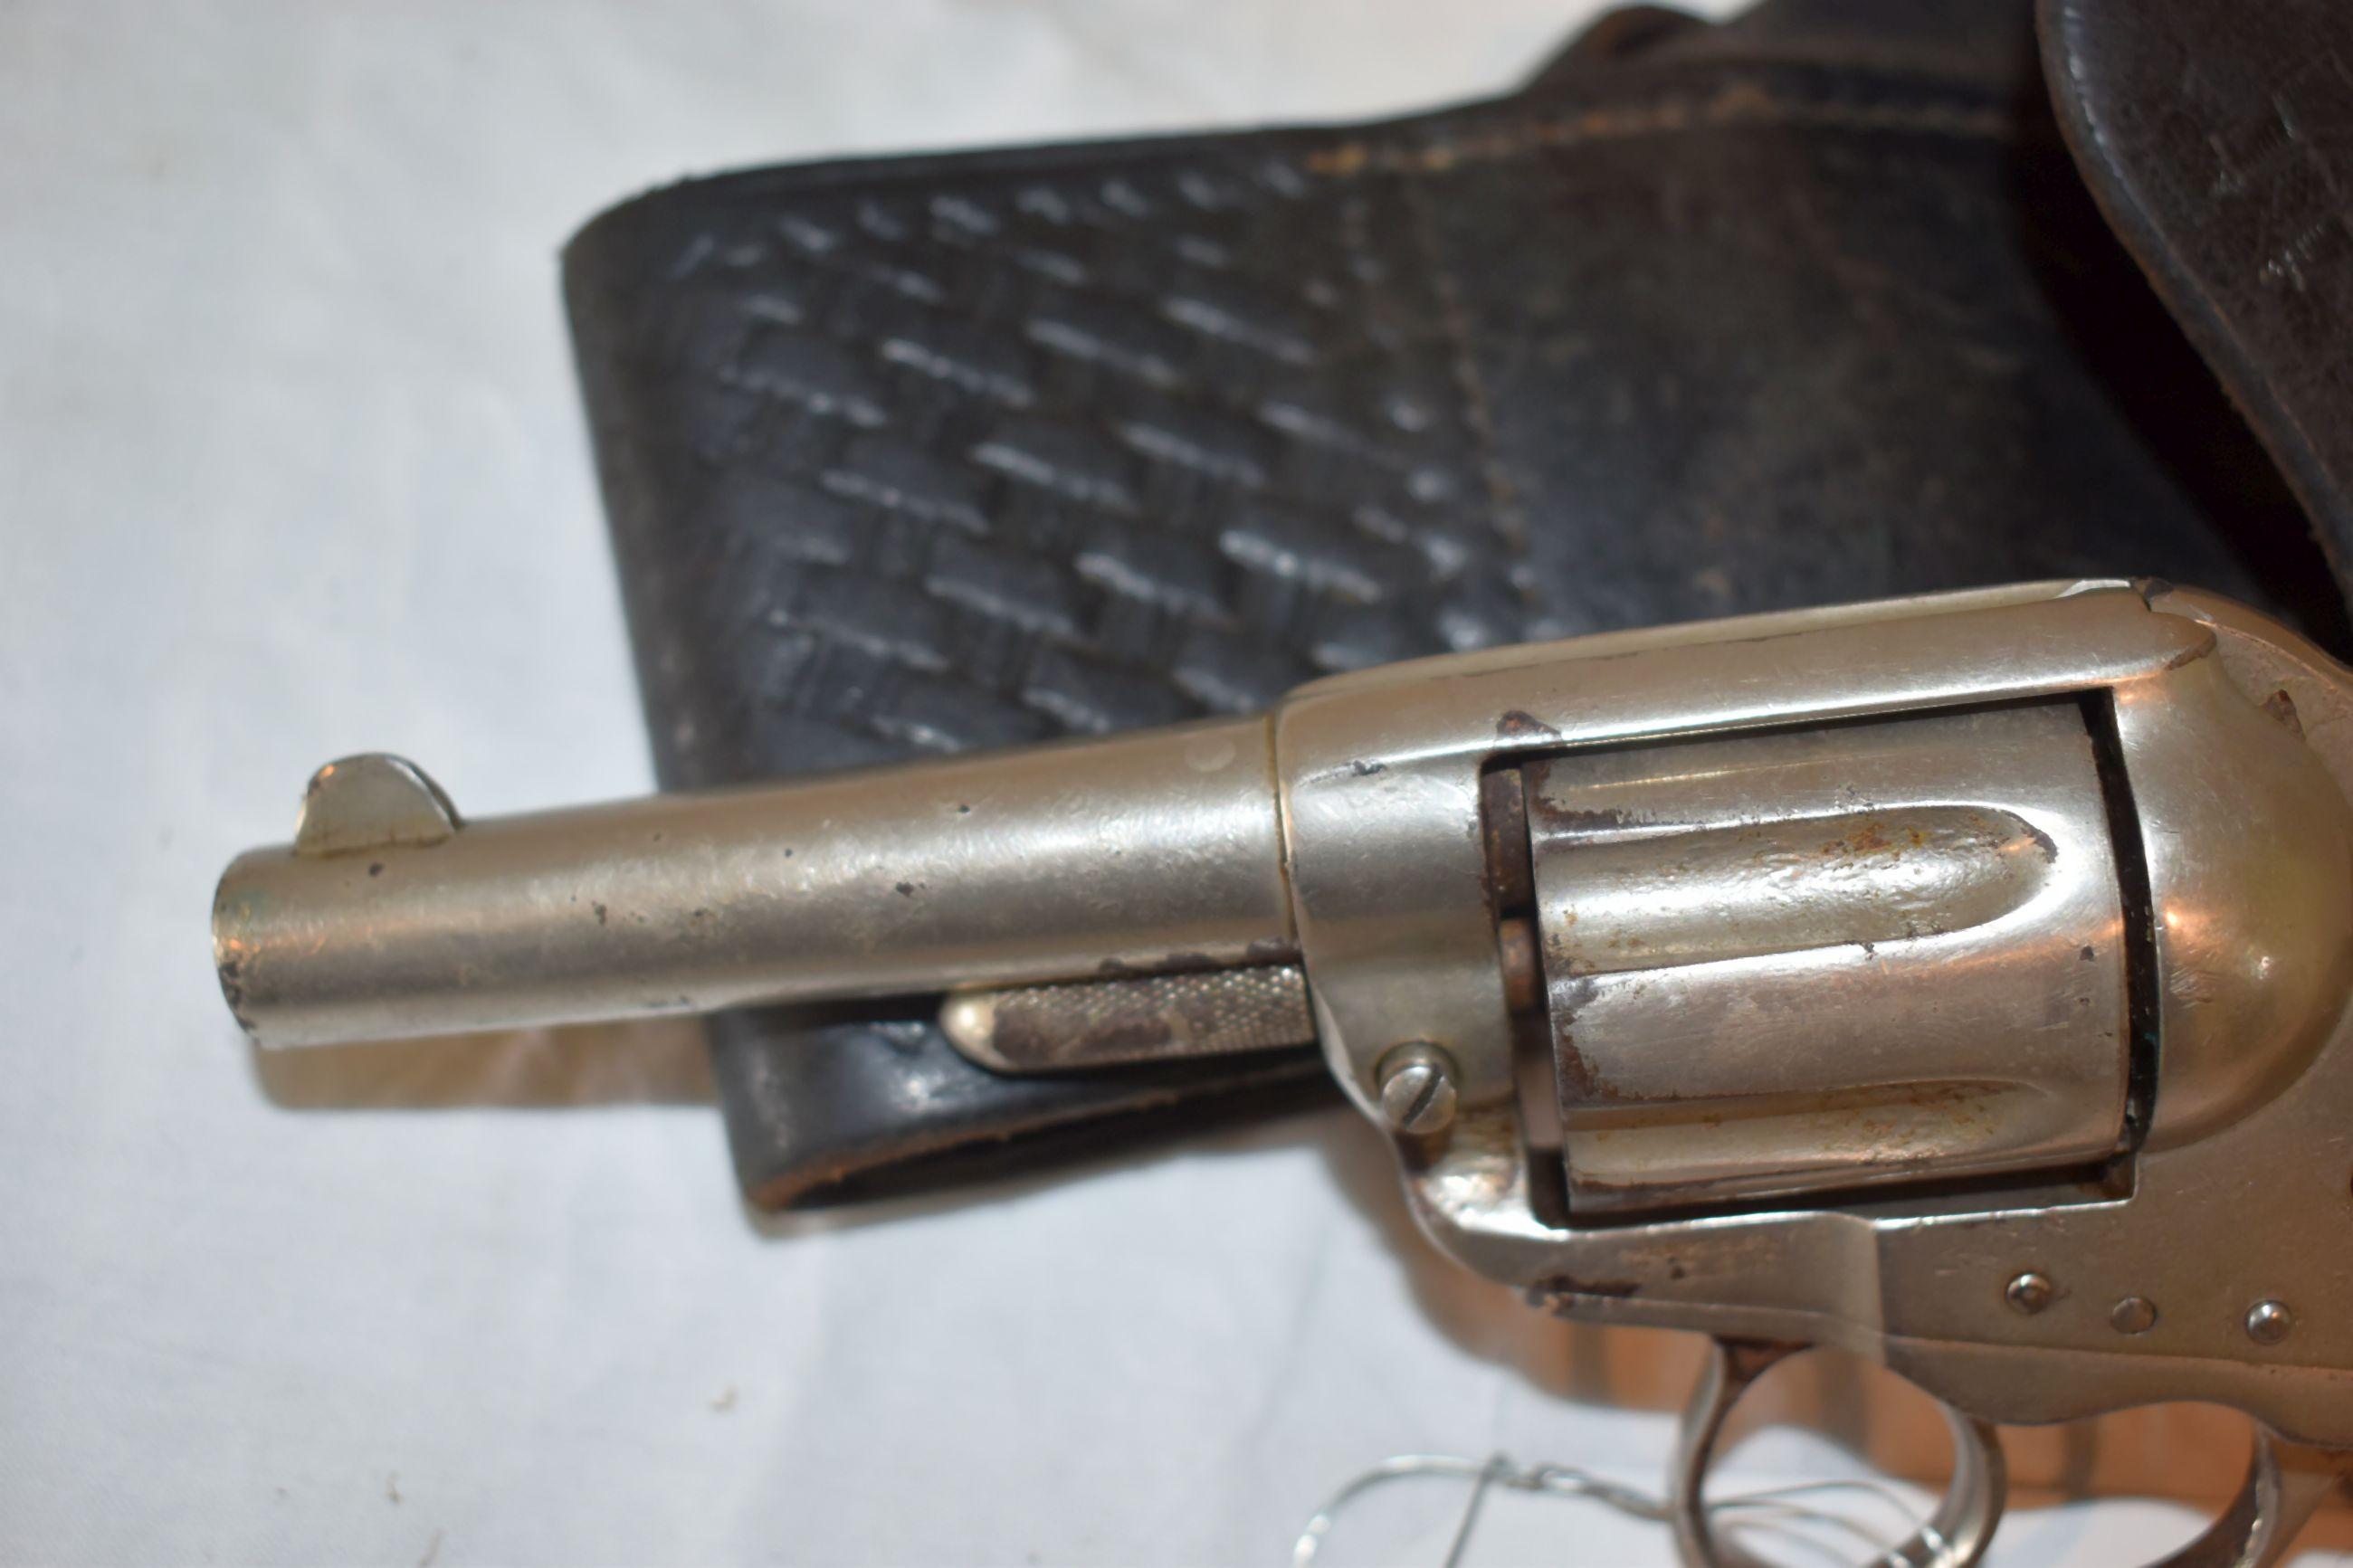 Colt 38 Cal. Revolver, With Some Pitting, With Leather Holster